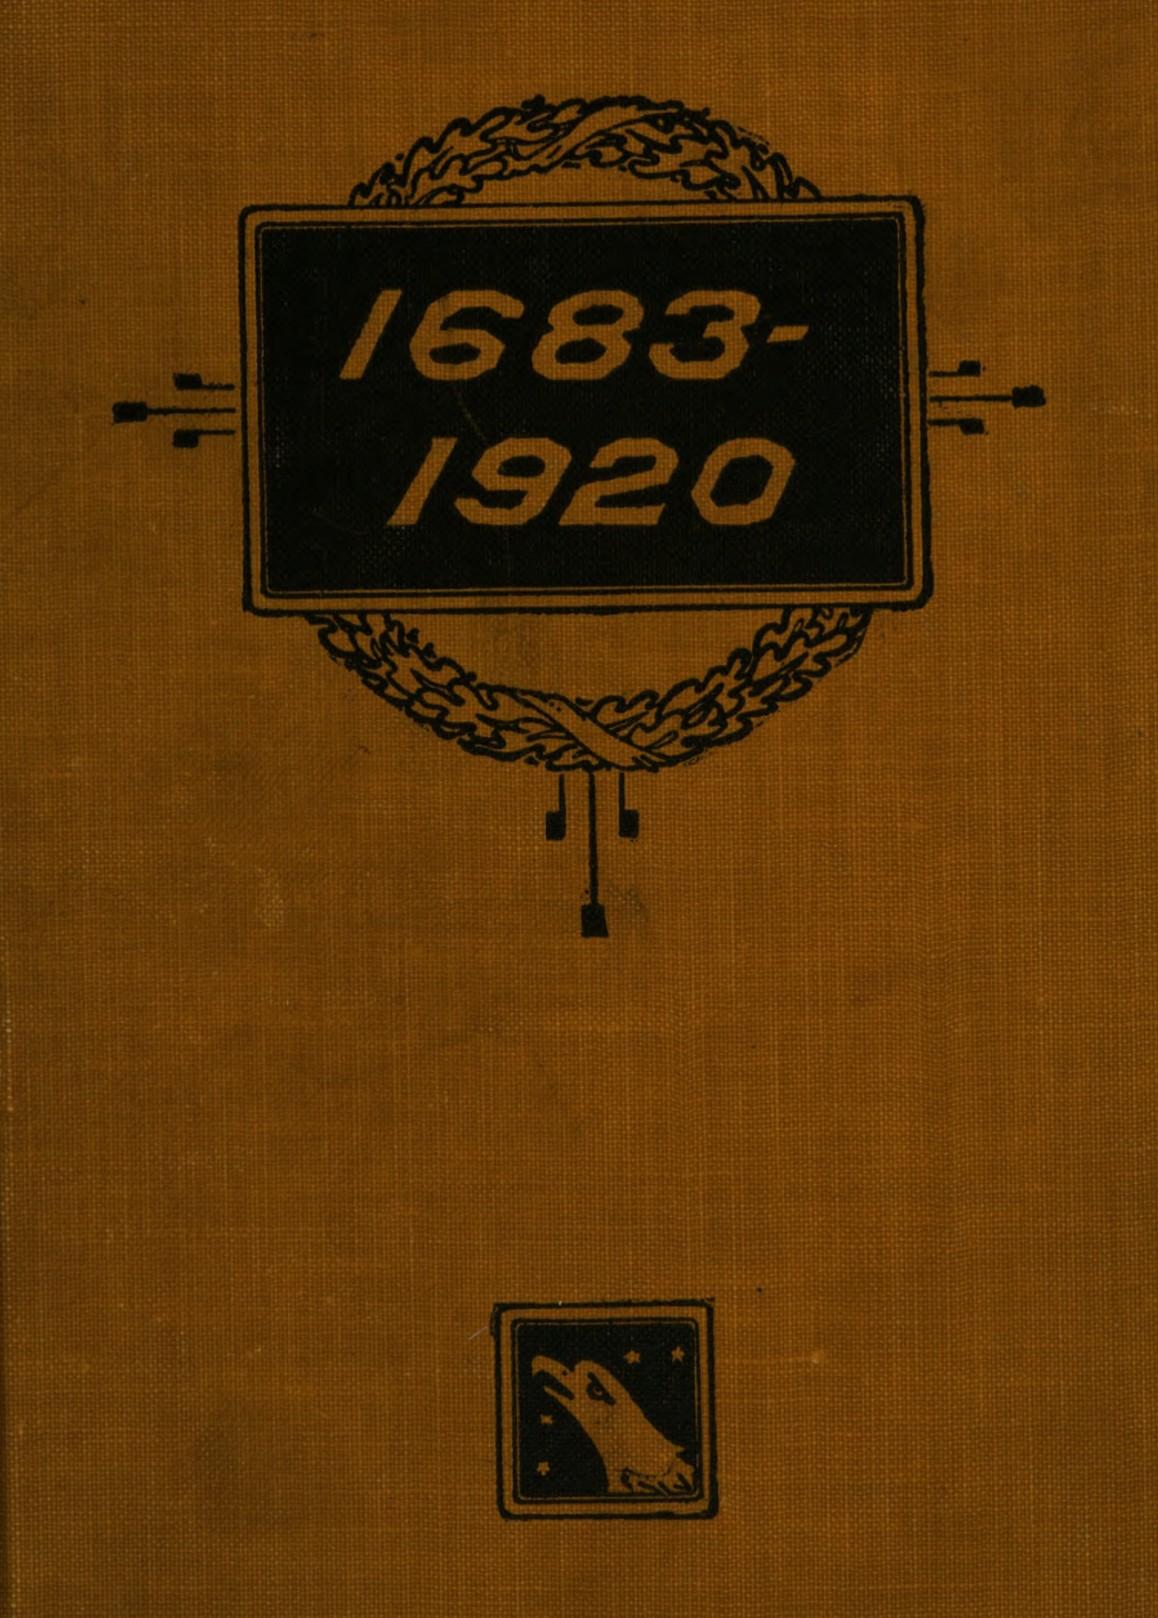 1683-1920: The Fourteen Points and What Became of Them (1920) by Frederick Franklin Schrader